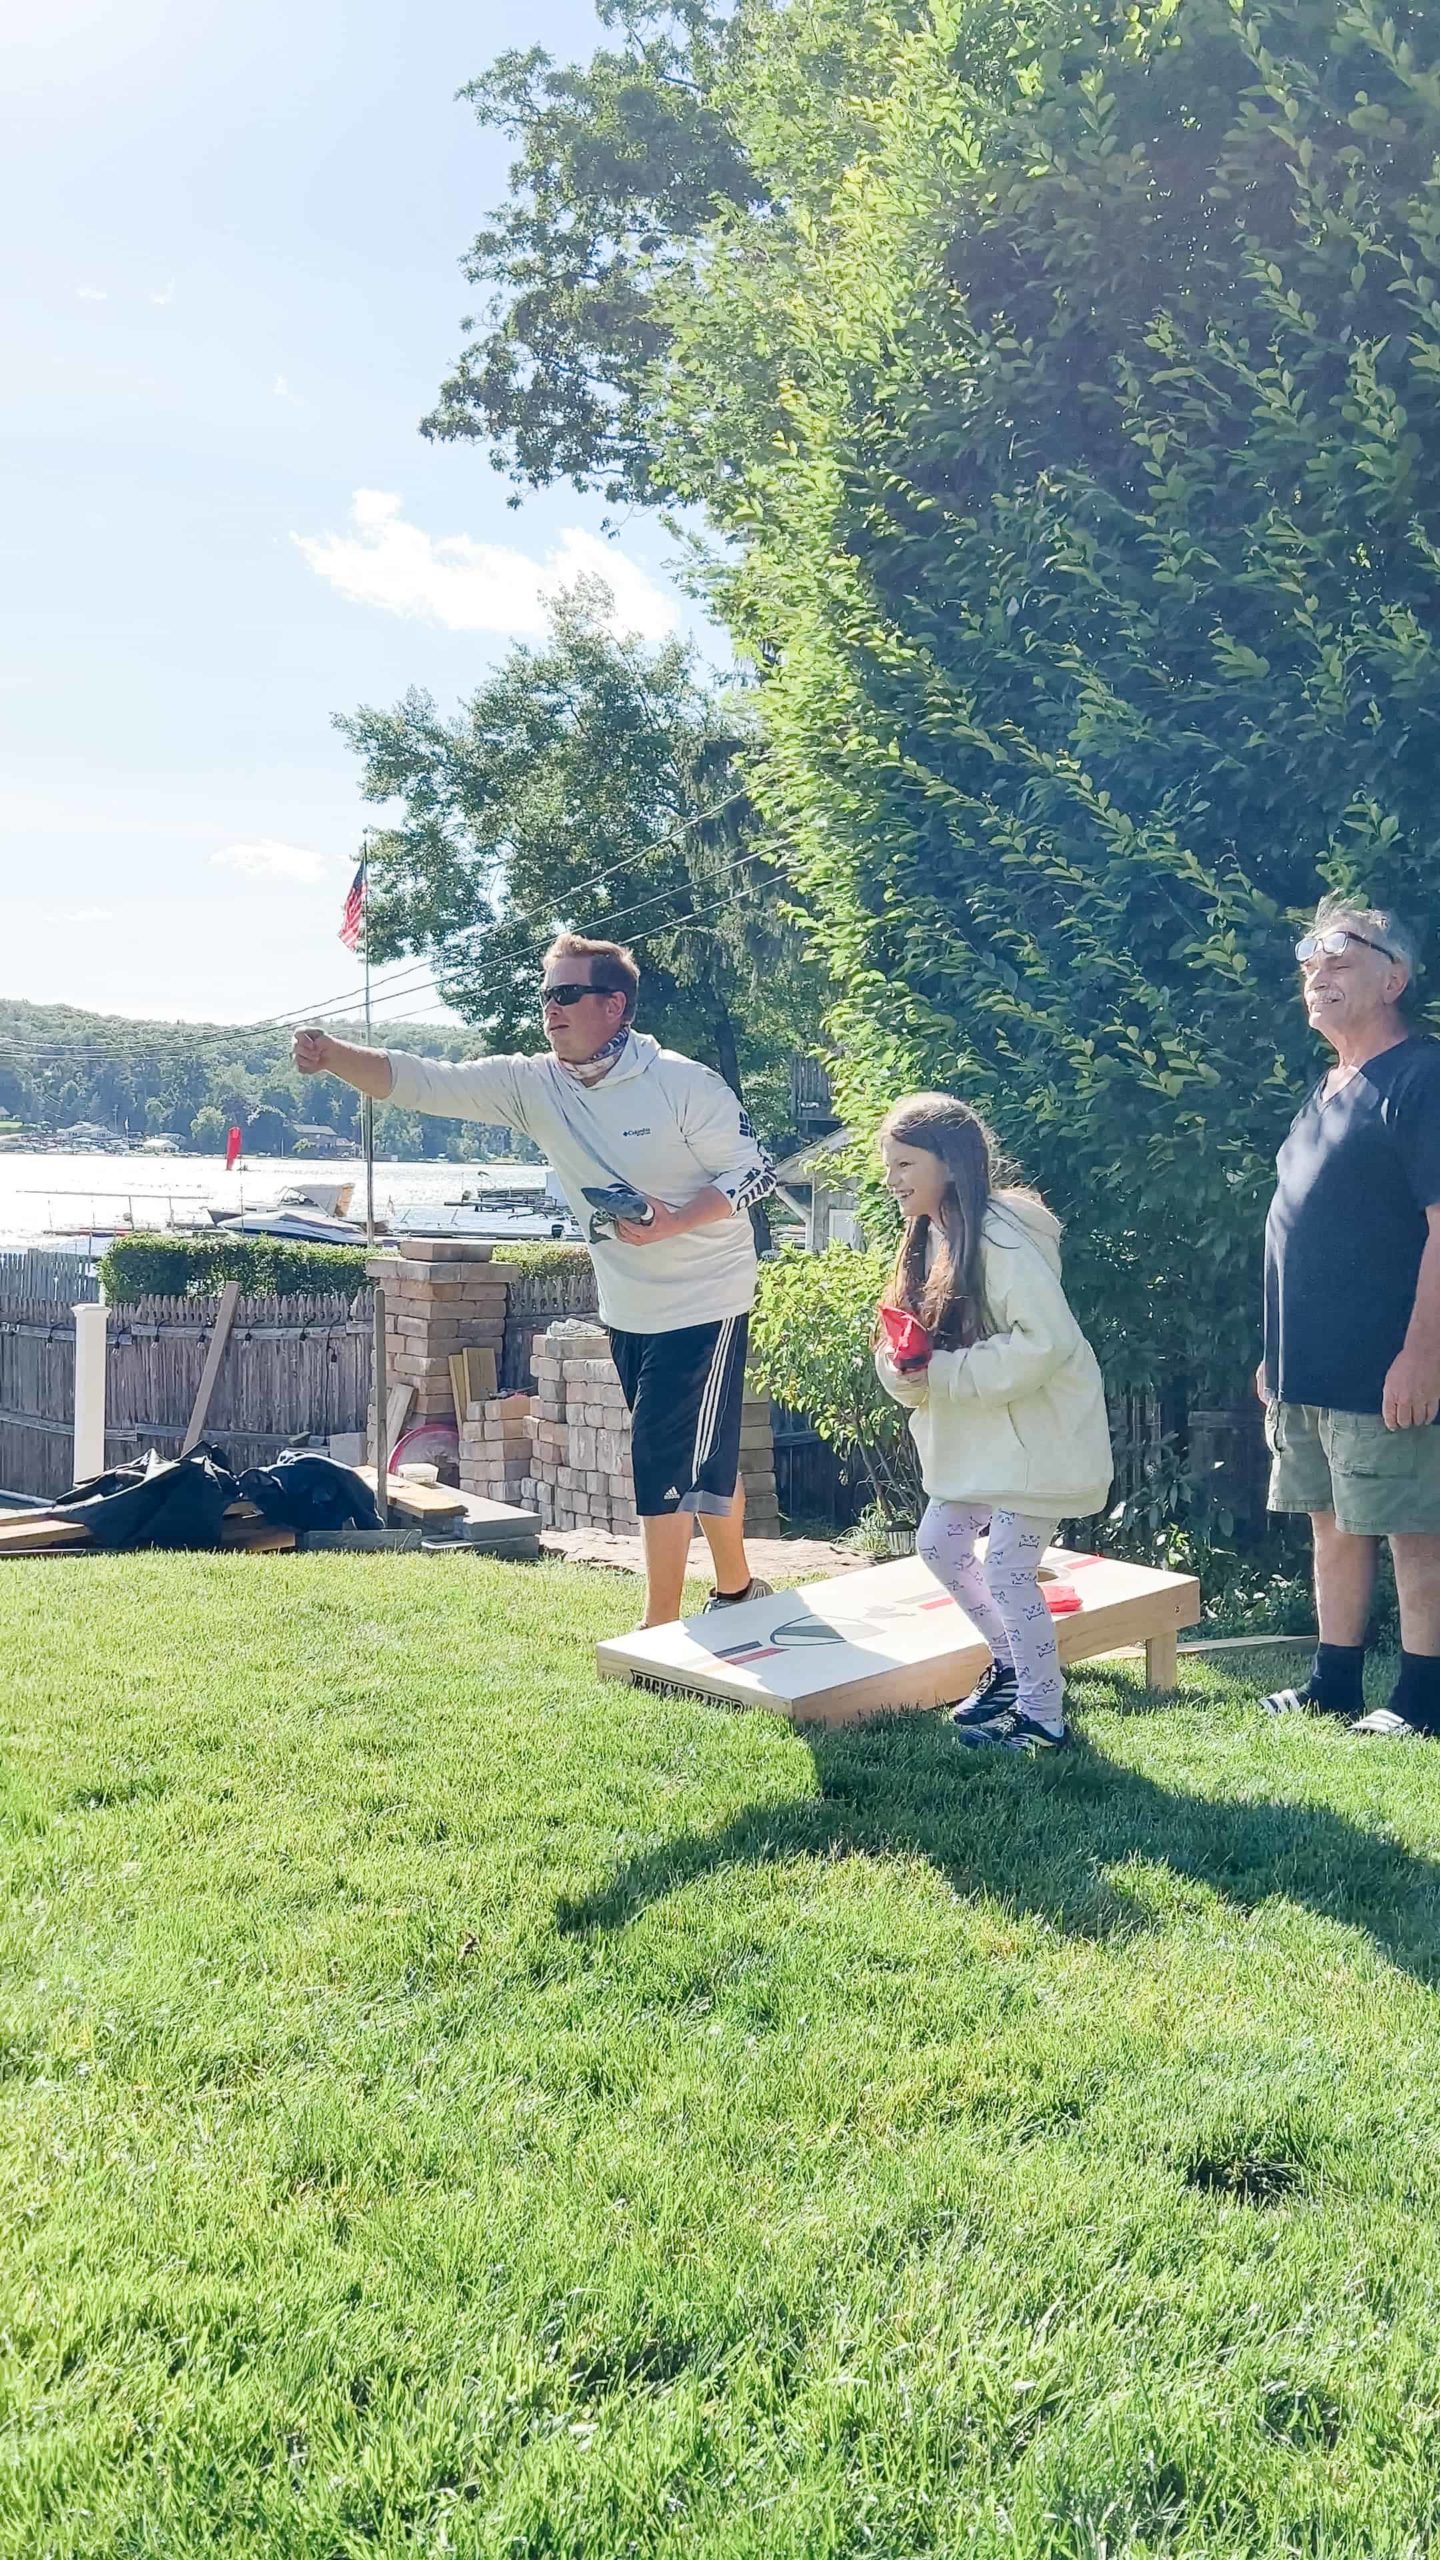 Multi-generational family engaged in a friendly game of Cornhole in a lush summer backyard, epitomizing joyful family bonding over outdoor games.